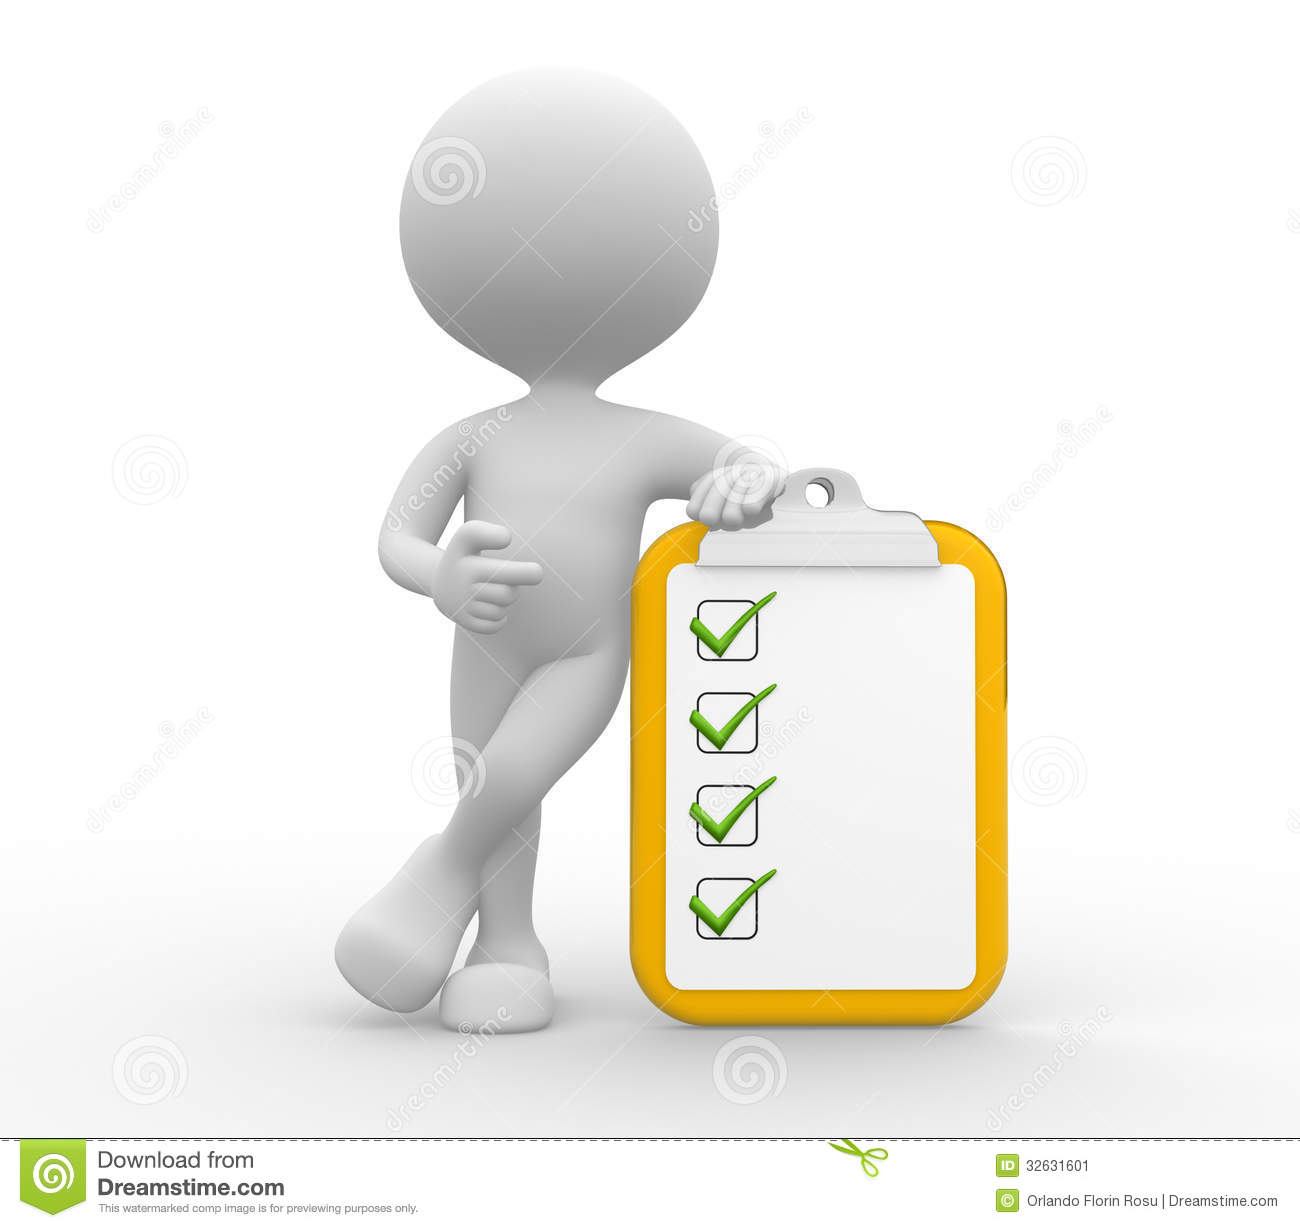 Clipboard And Checklist  Stock Image   Image  32631601